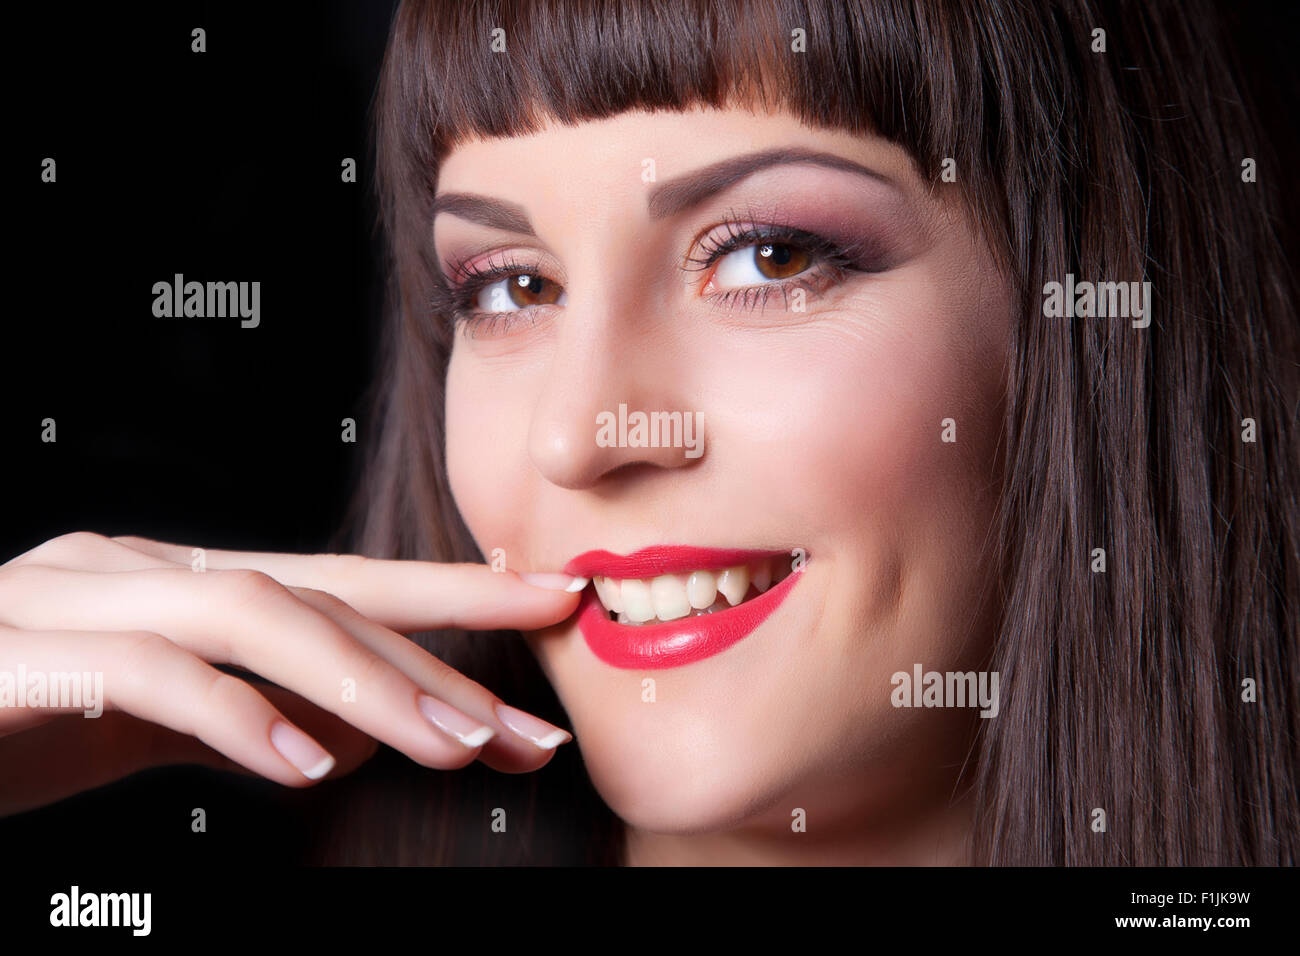 Close-up portrait of young Beautiful woman with trendy make-up Banque D'Images